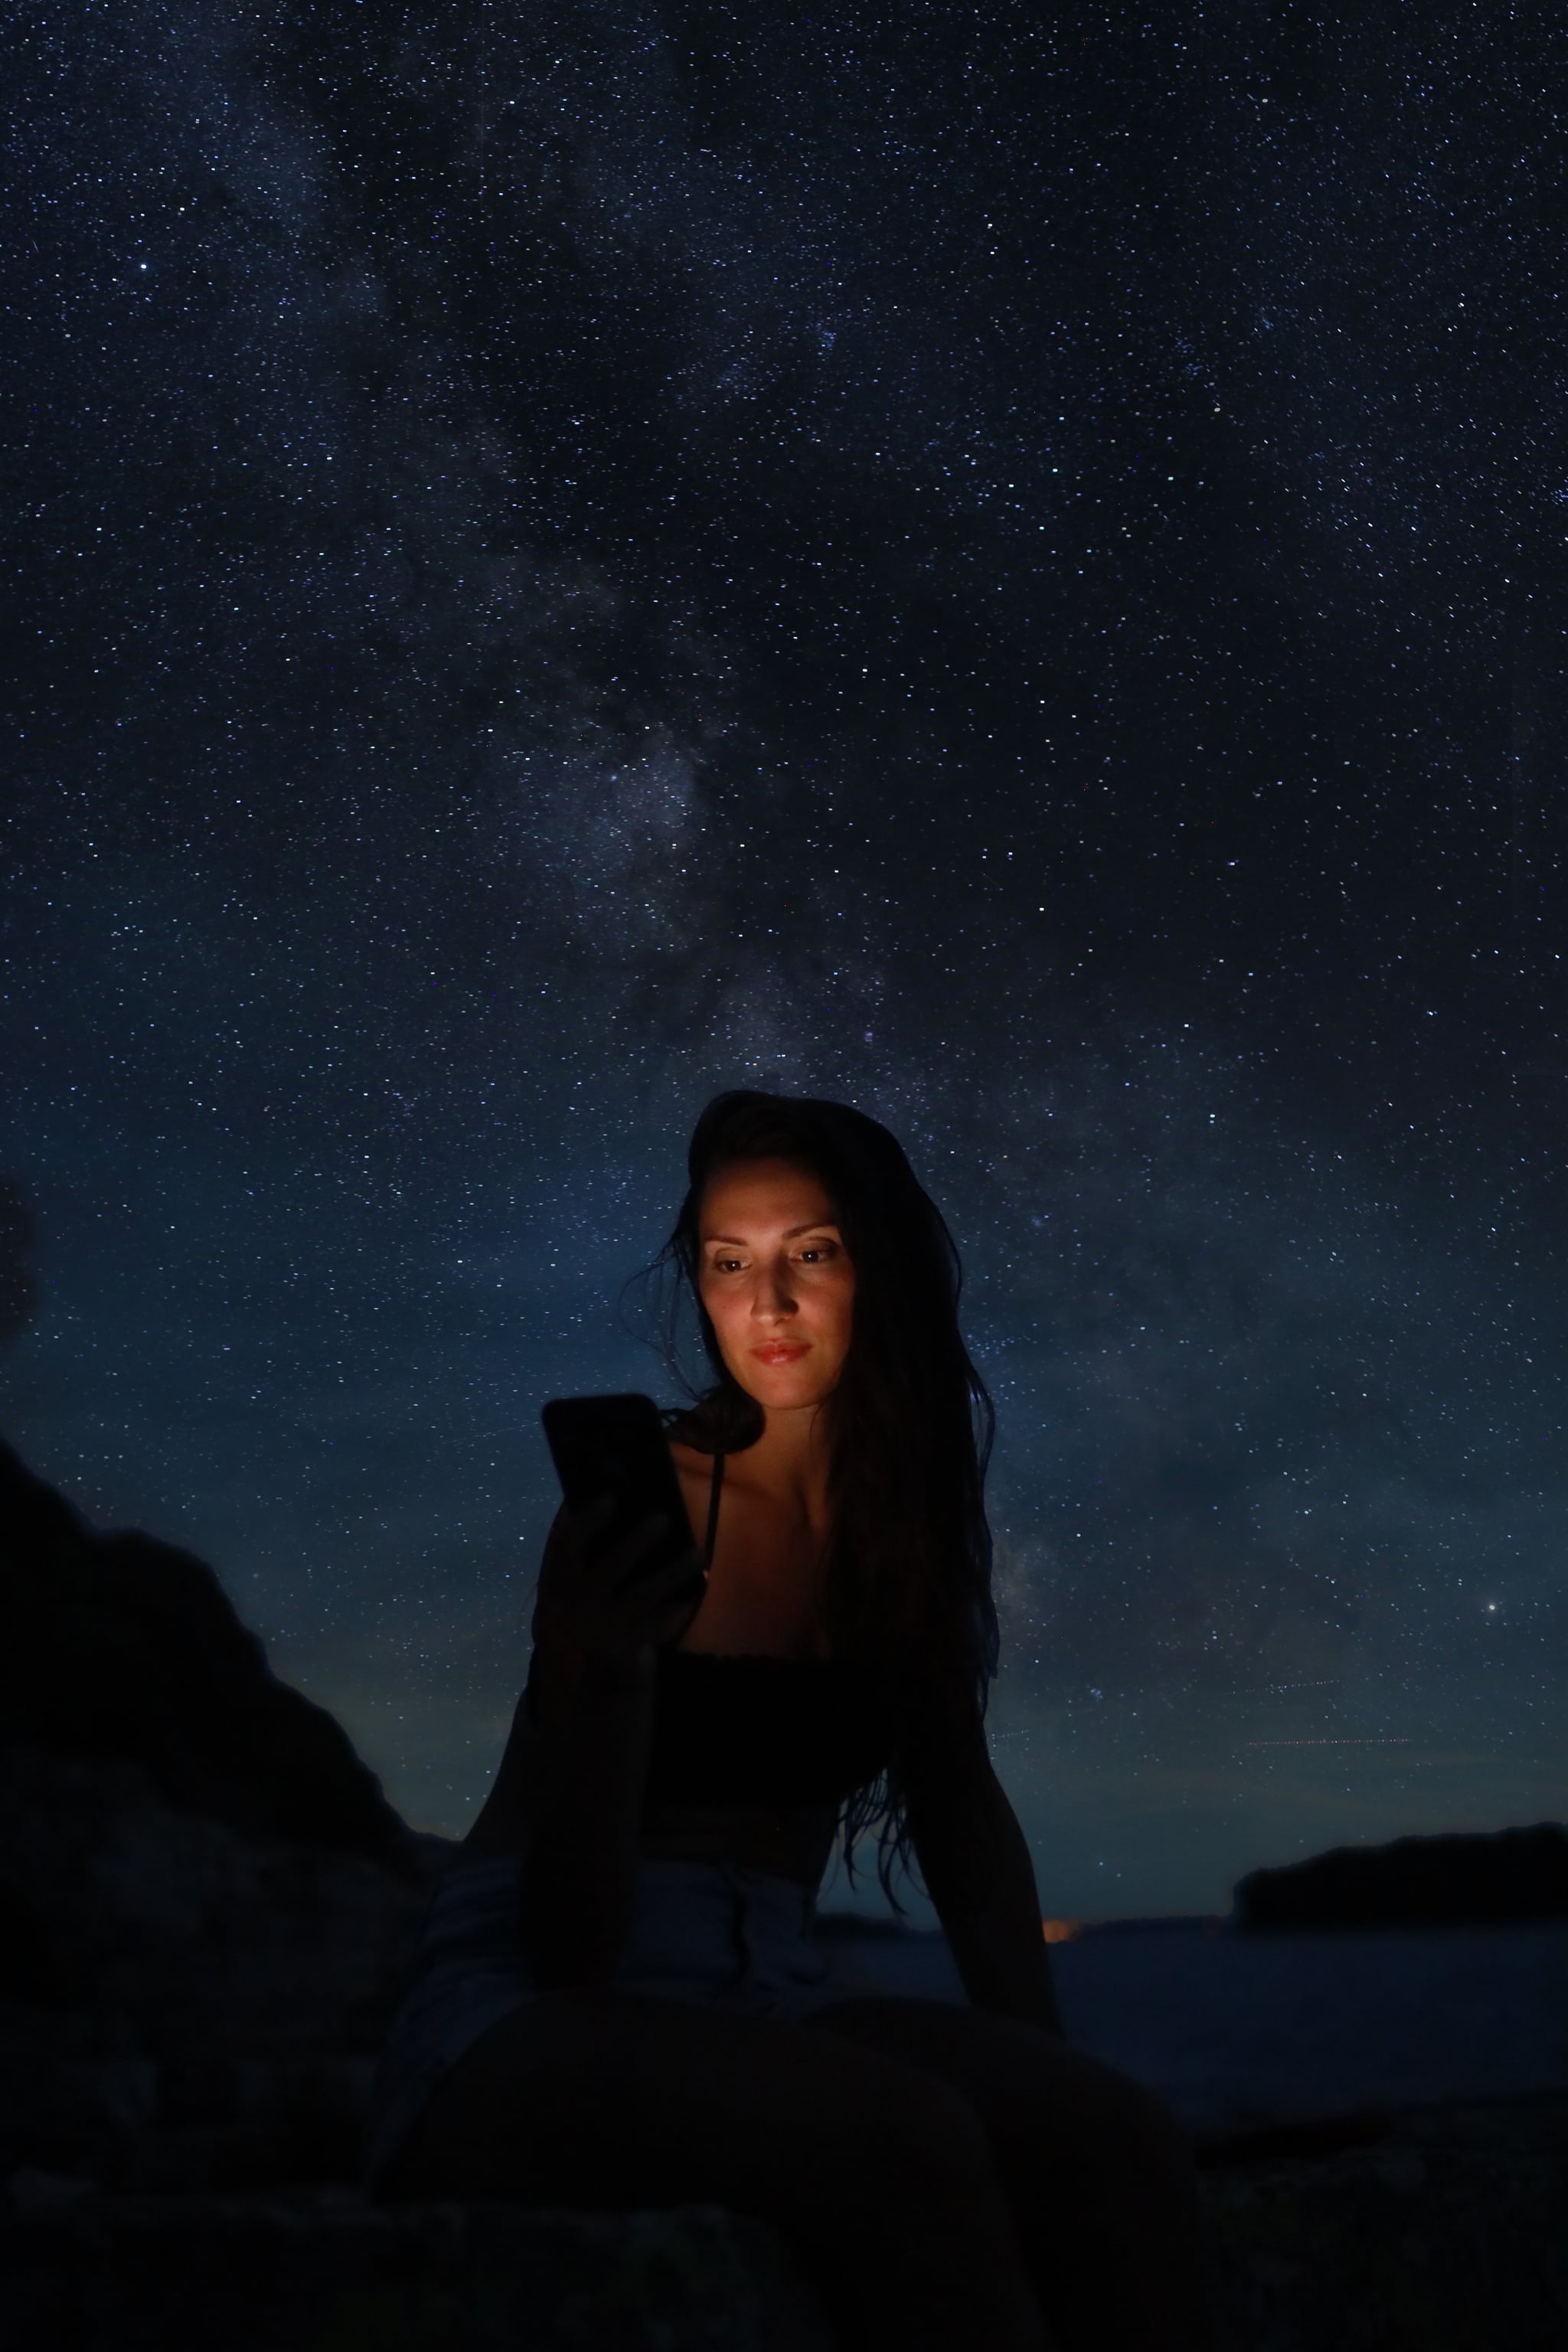 Woman sitting on the beach under the starry sky, looking at her cellphone